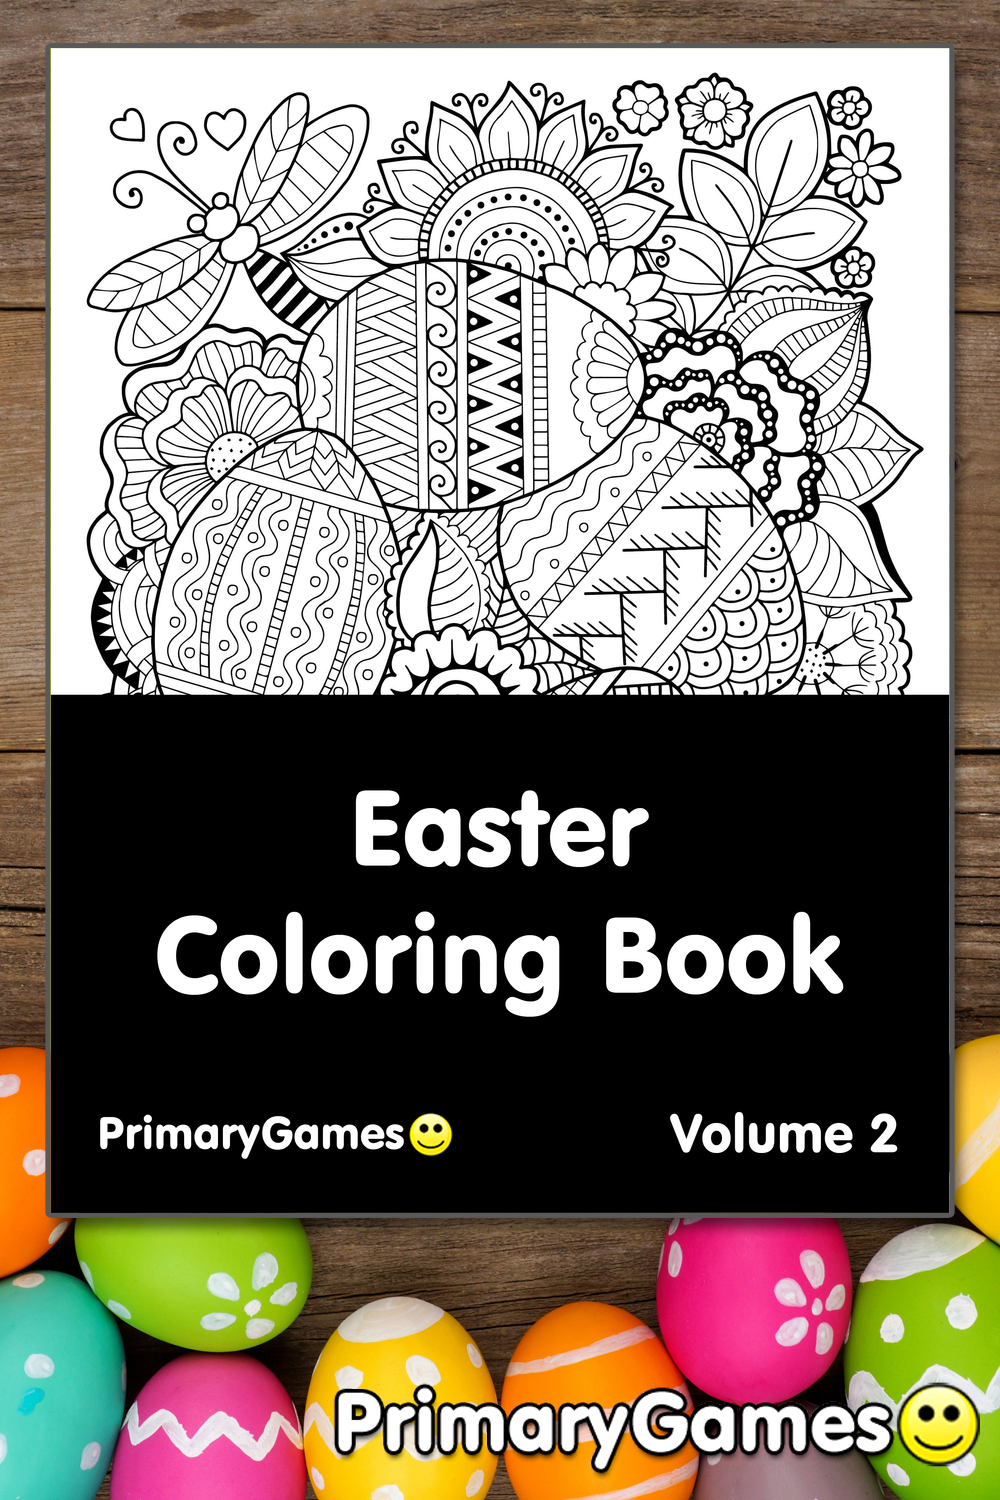 Download Easter Coloring eBook: Volume 2 • FREE Printable PDF from PrimaryGames